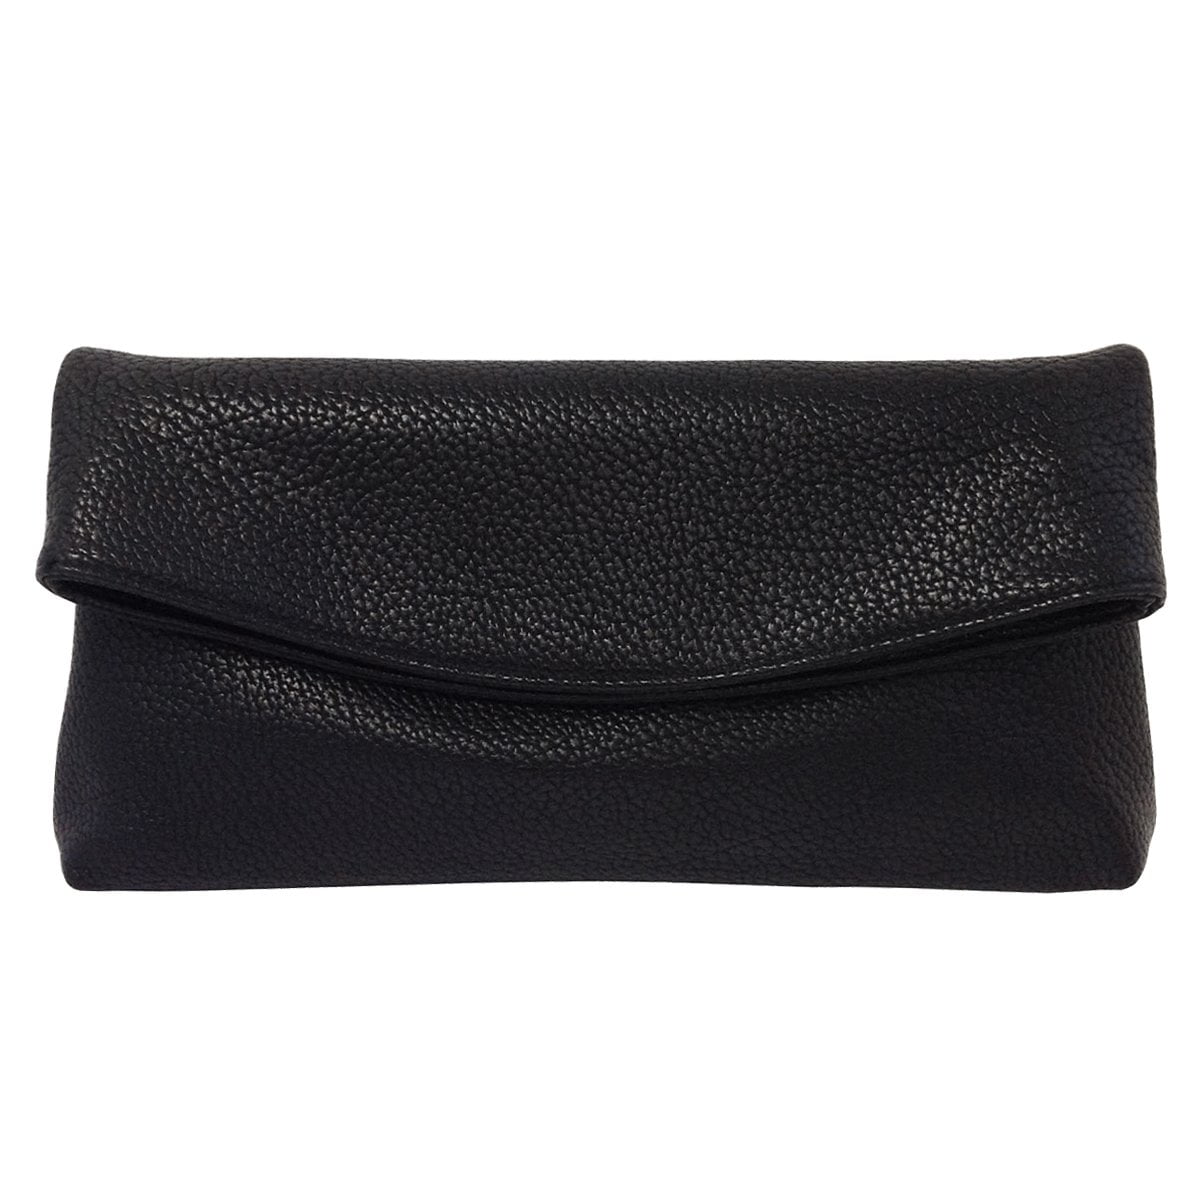 Chaps, the envelope clutch bag is the in thing this winter